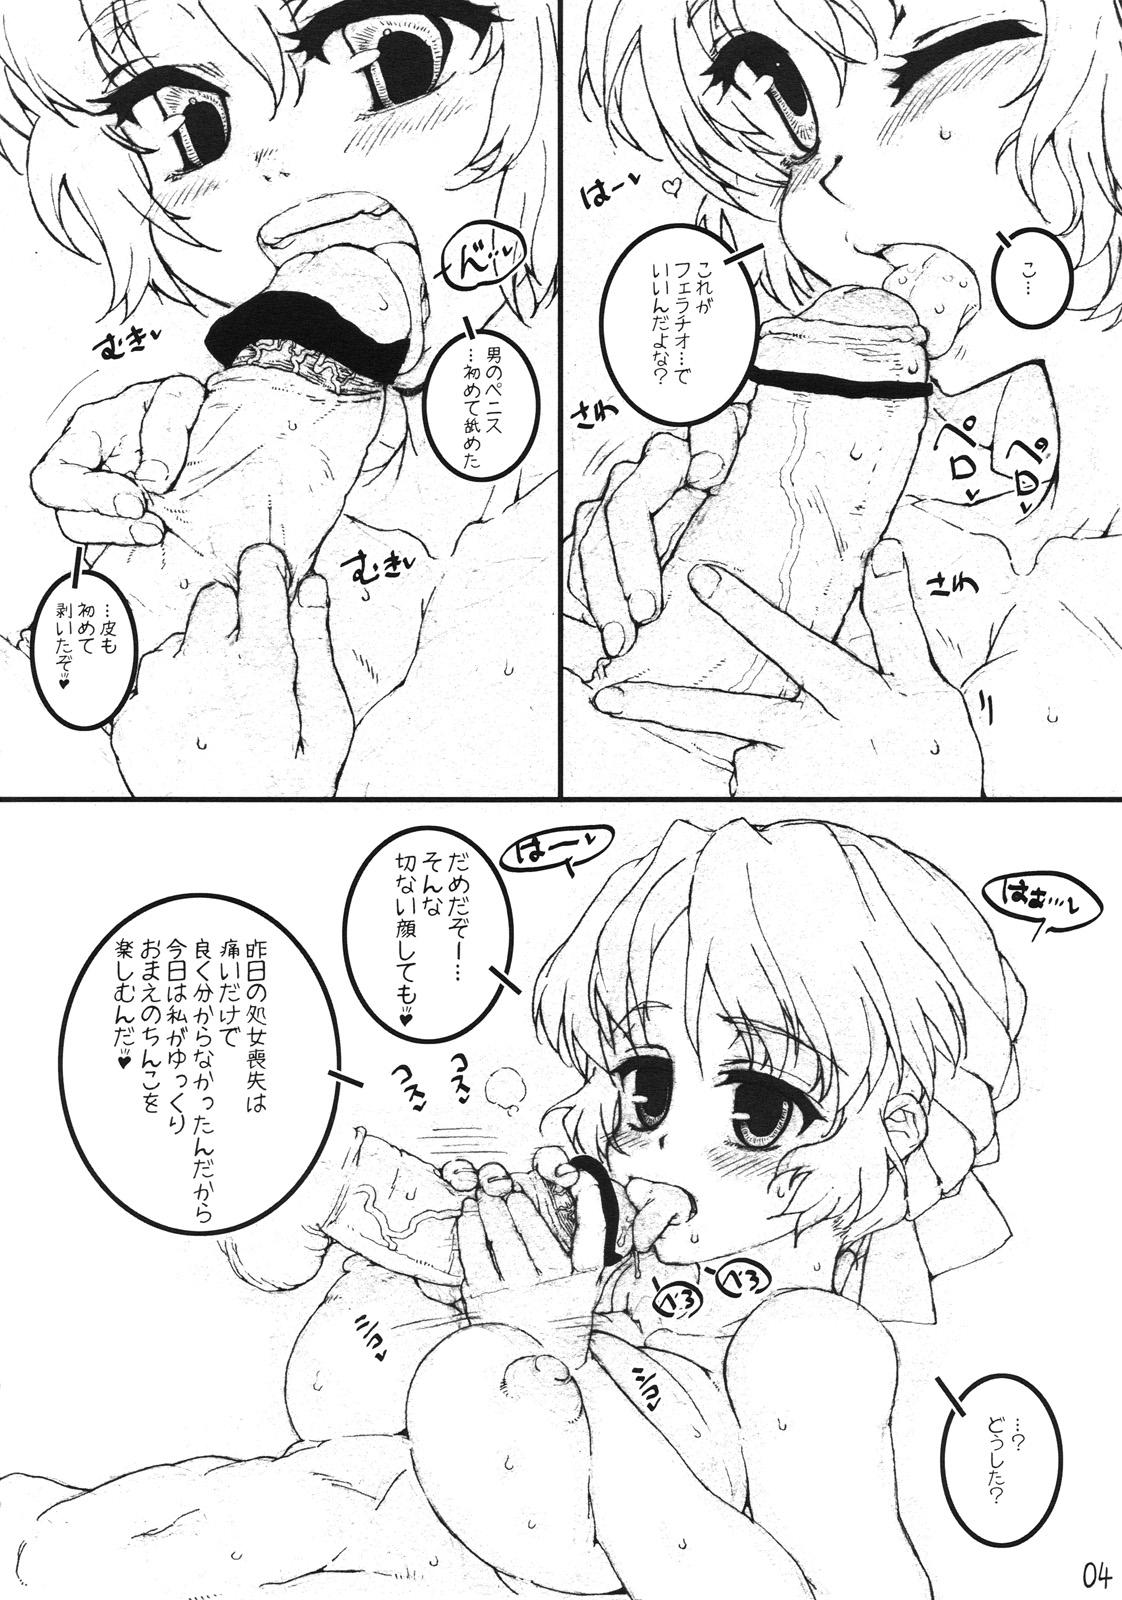 Best Blowjob Tokki to Issho! Massages - Page 3